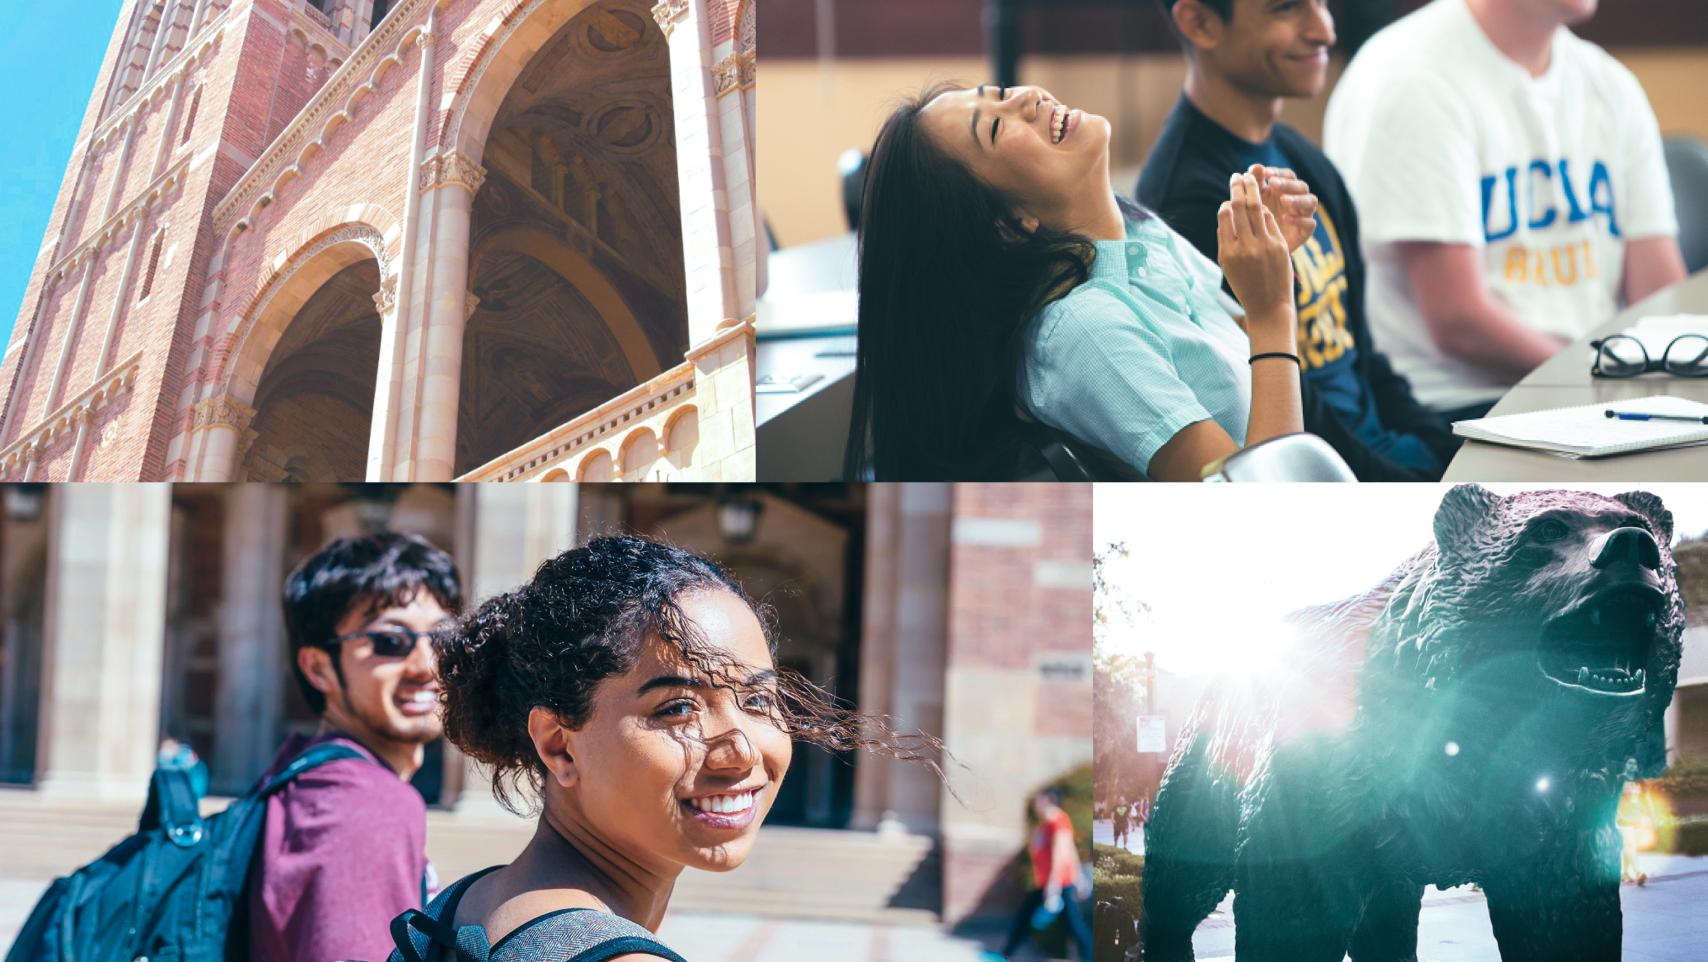 A collage of UCLA students and campus shots.